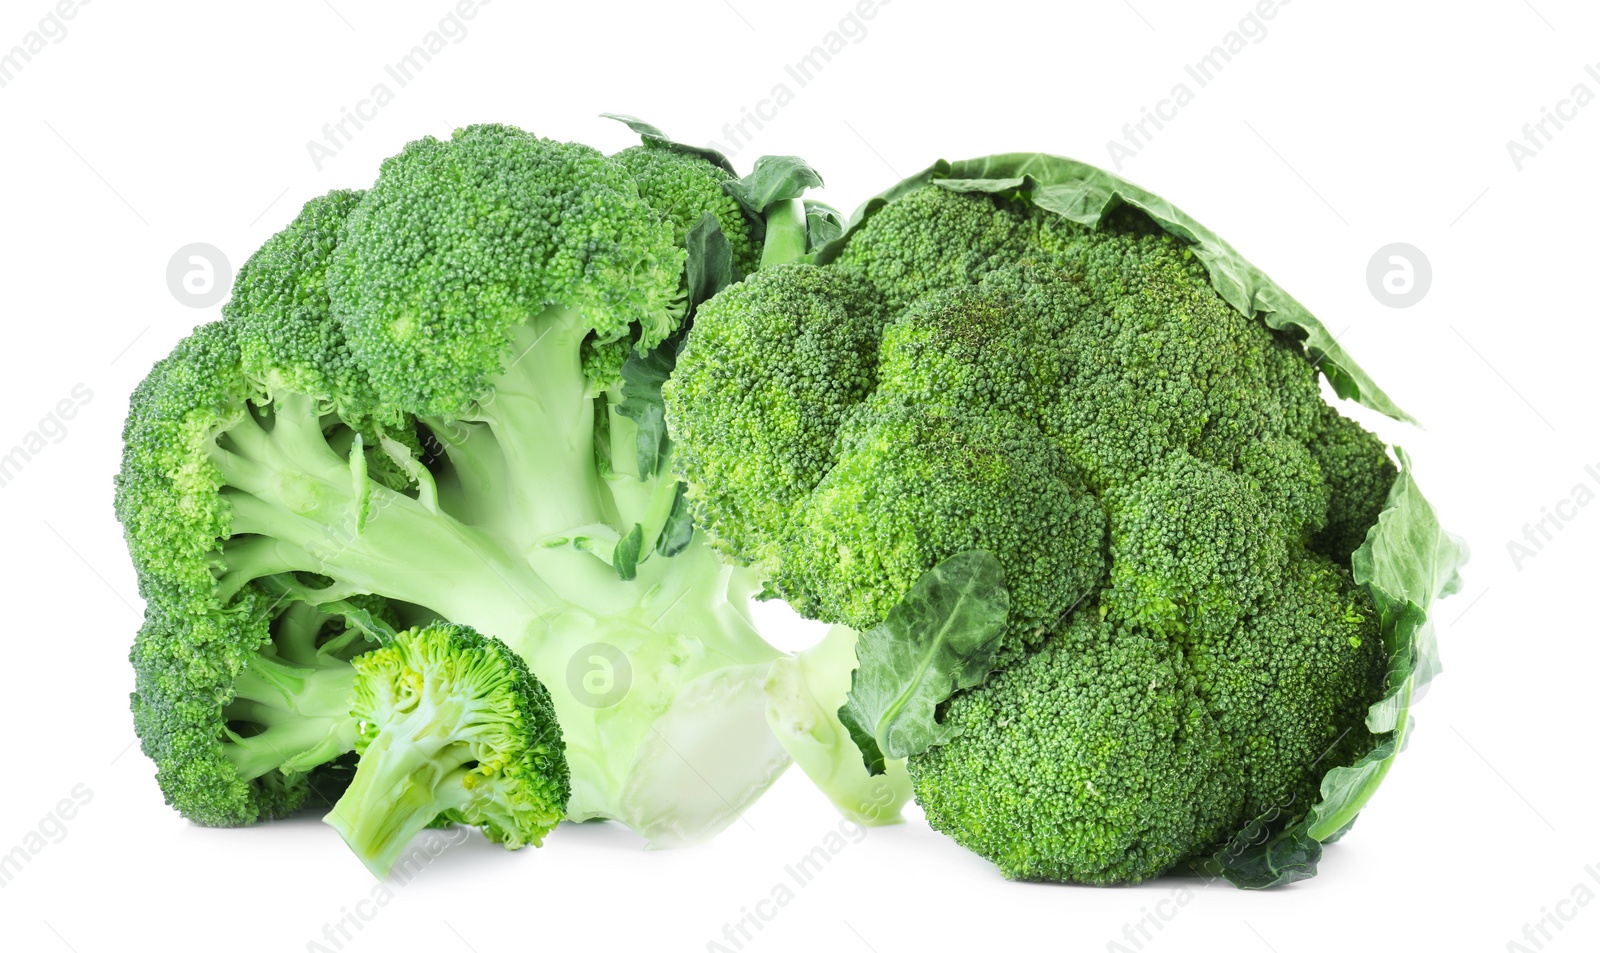 Image of Fresh green broccoli on white background. Edible plant